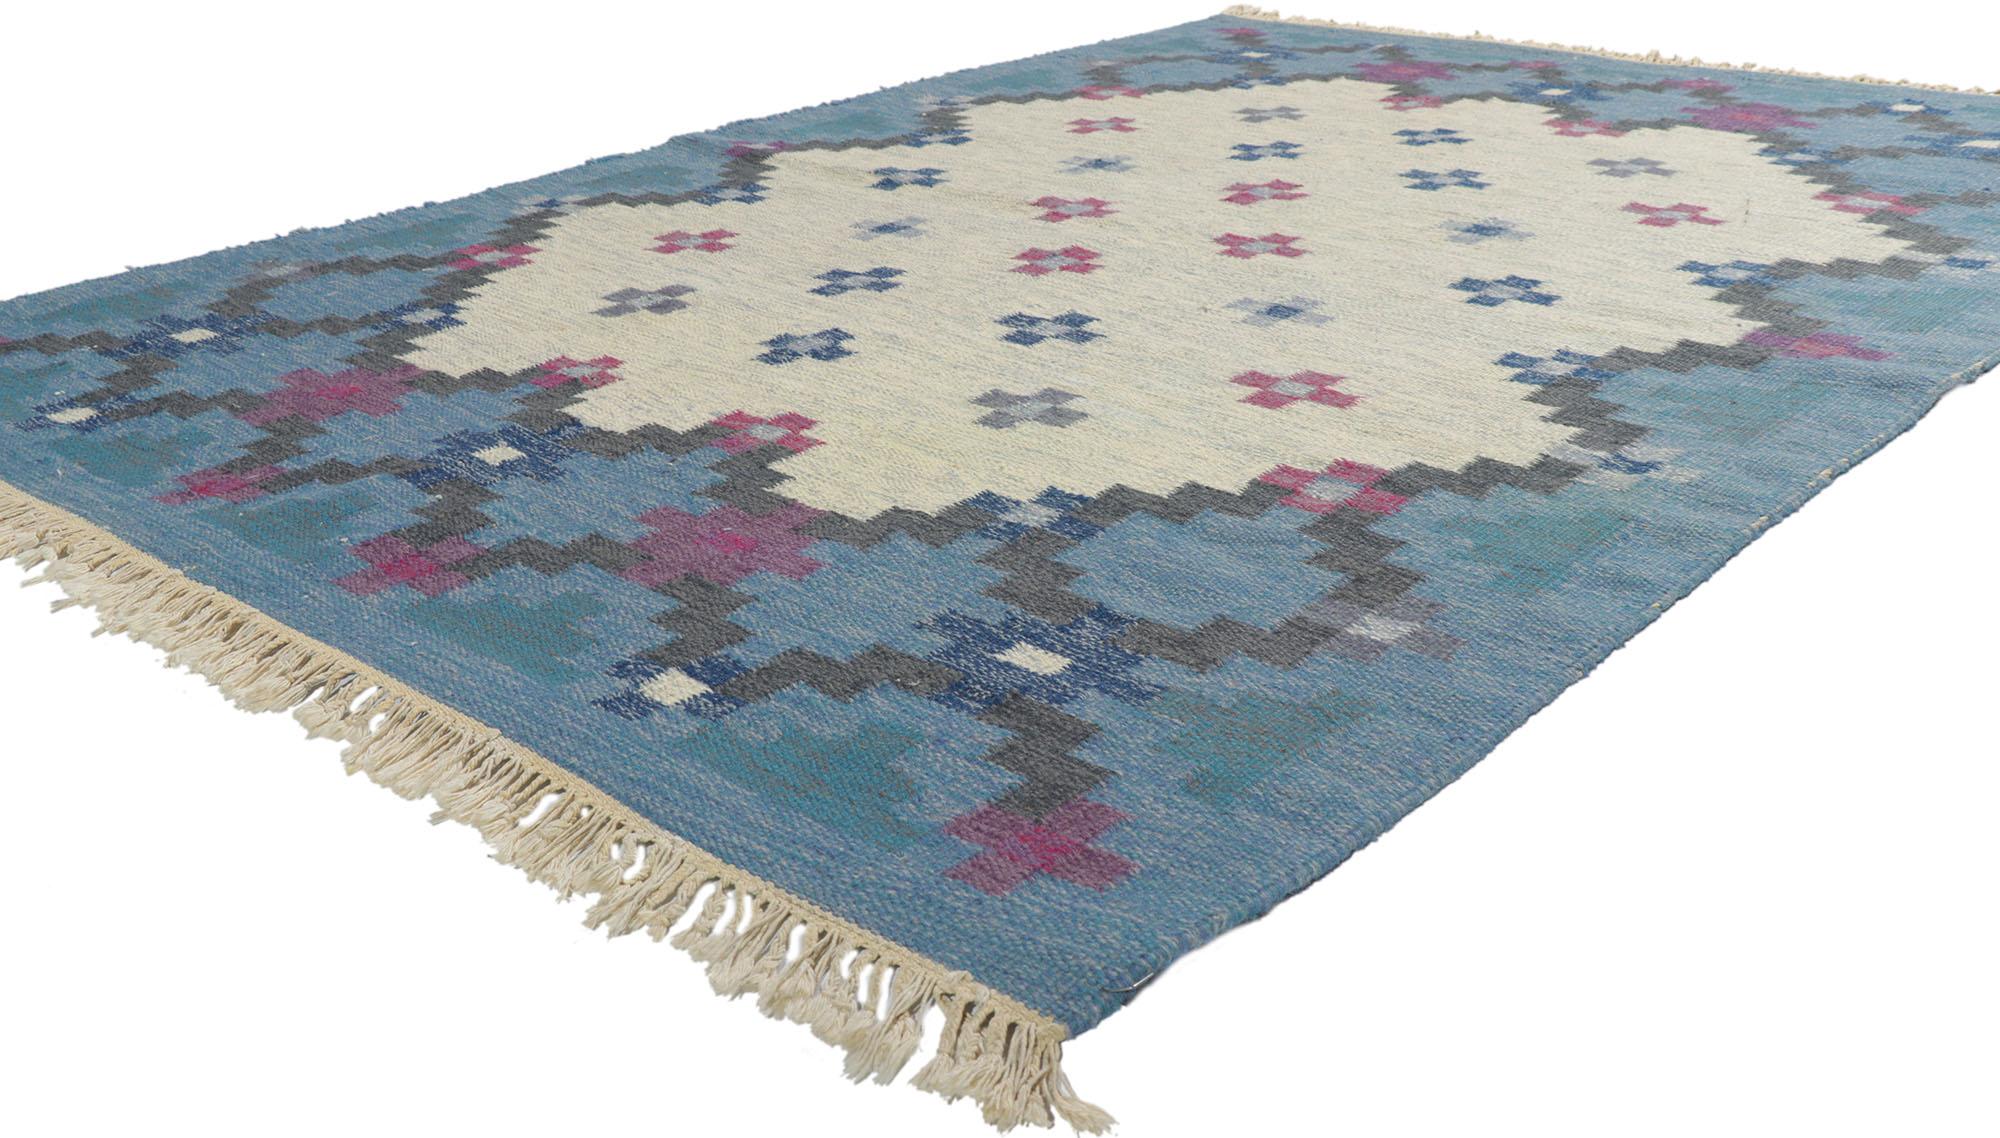 78265 Vintage Swedish Kilim Anne Marie Boberg Rollakan rug with Scandinavian Modern Style 05'07 x 07'07. With its geometric design and bohemian hygge vibes, this hand-woven wool Swedish Kilim rug beautifully embodies the simplicity of Scandinavian